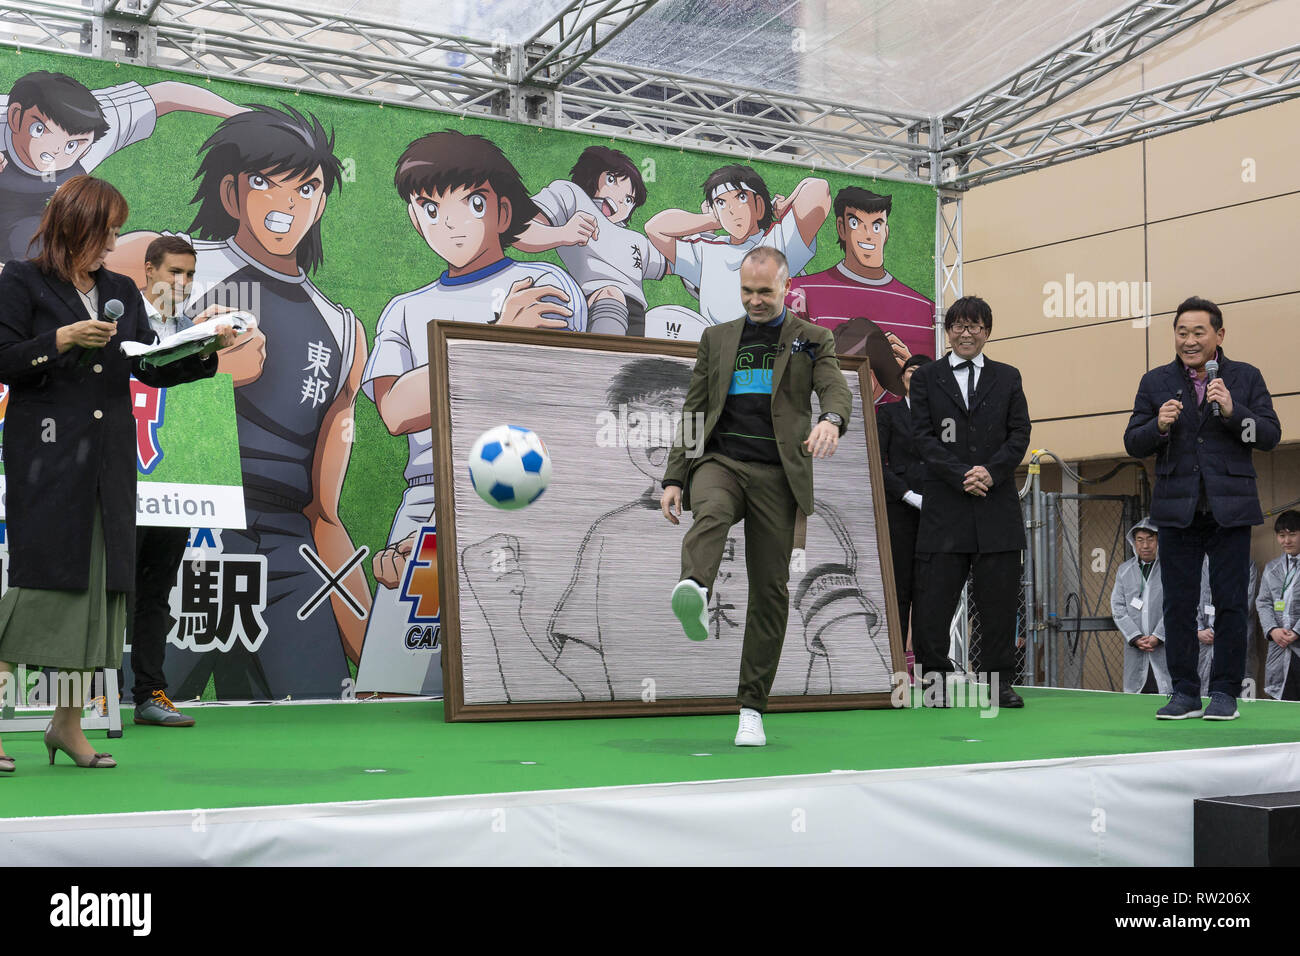 Tokyo, Japan. 4th Mar, 2019. Barcelona legend playmaker Andres Iniesta kicks a ball during an opening ceremony for the Yotsugi Station and Captain Tsubasa project. Iniesta was named Official Collaborator for the Yotsugi Station and Captain Tsubasa project, which aims to promote the tourism in the ward of Katsushika, the hometown of Yoichi Takahashi author of the Captain Tsubasa manga. Iniesta who is playing for the Japanese football club Vissel Kobe also visited the Yotsugi Station to see Captain Tsubasa manga characters decorating the interior of the train station. (Credit Image: © Rodrigo Stock Photo